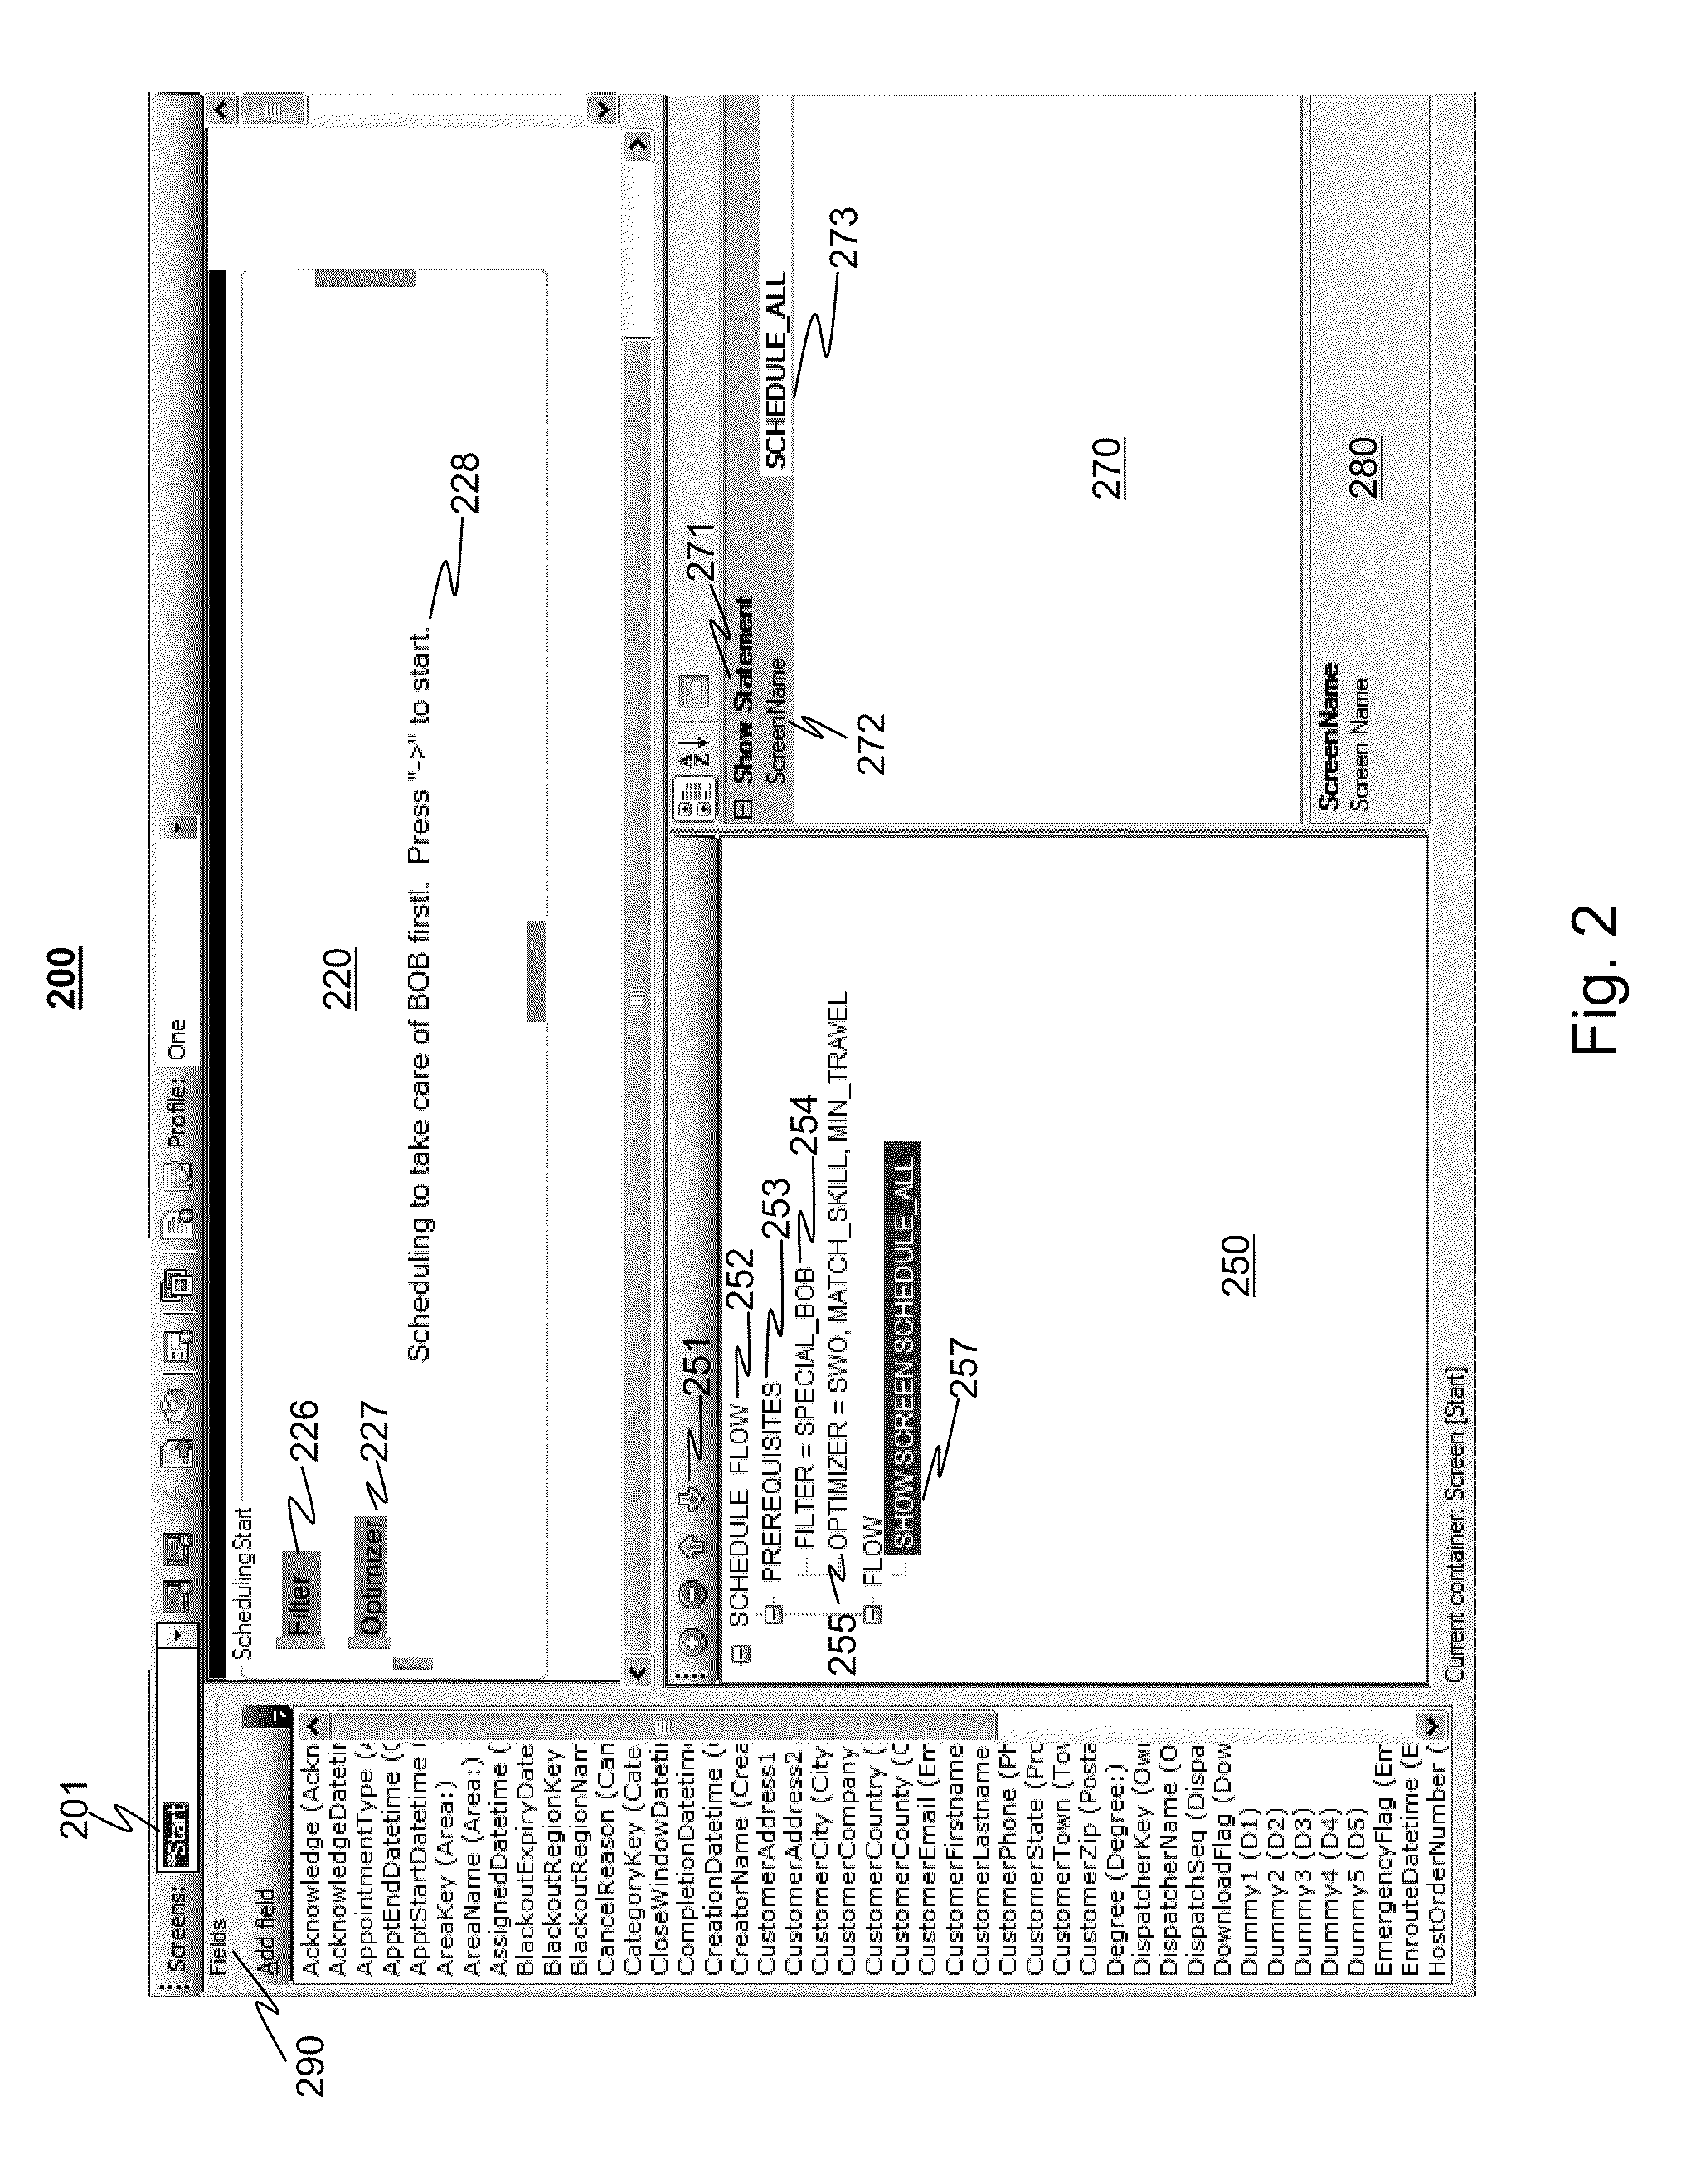 System and method for a configurable and extensible allocation and scheduling tool